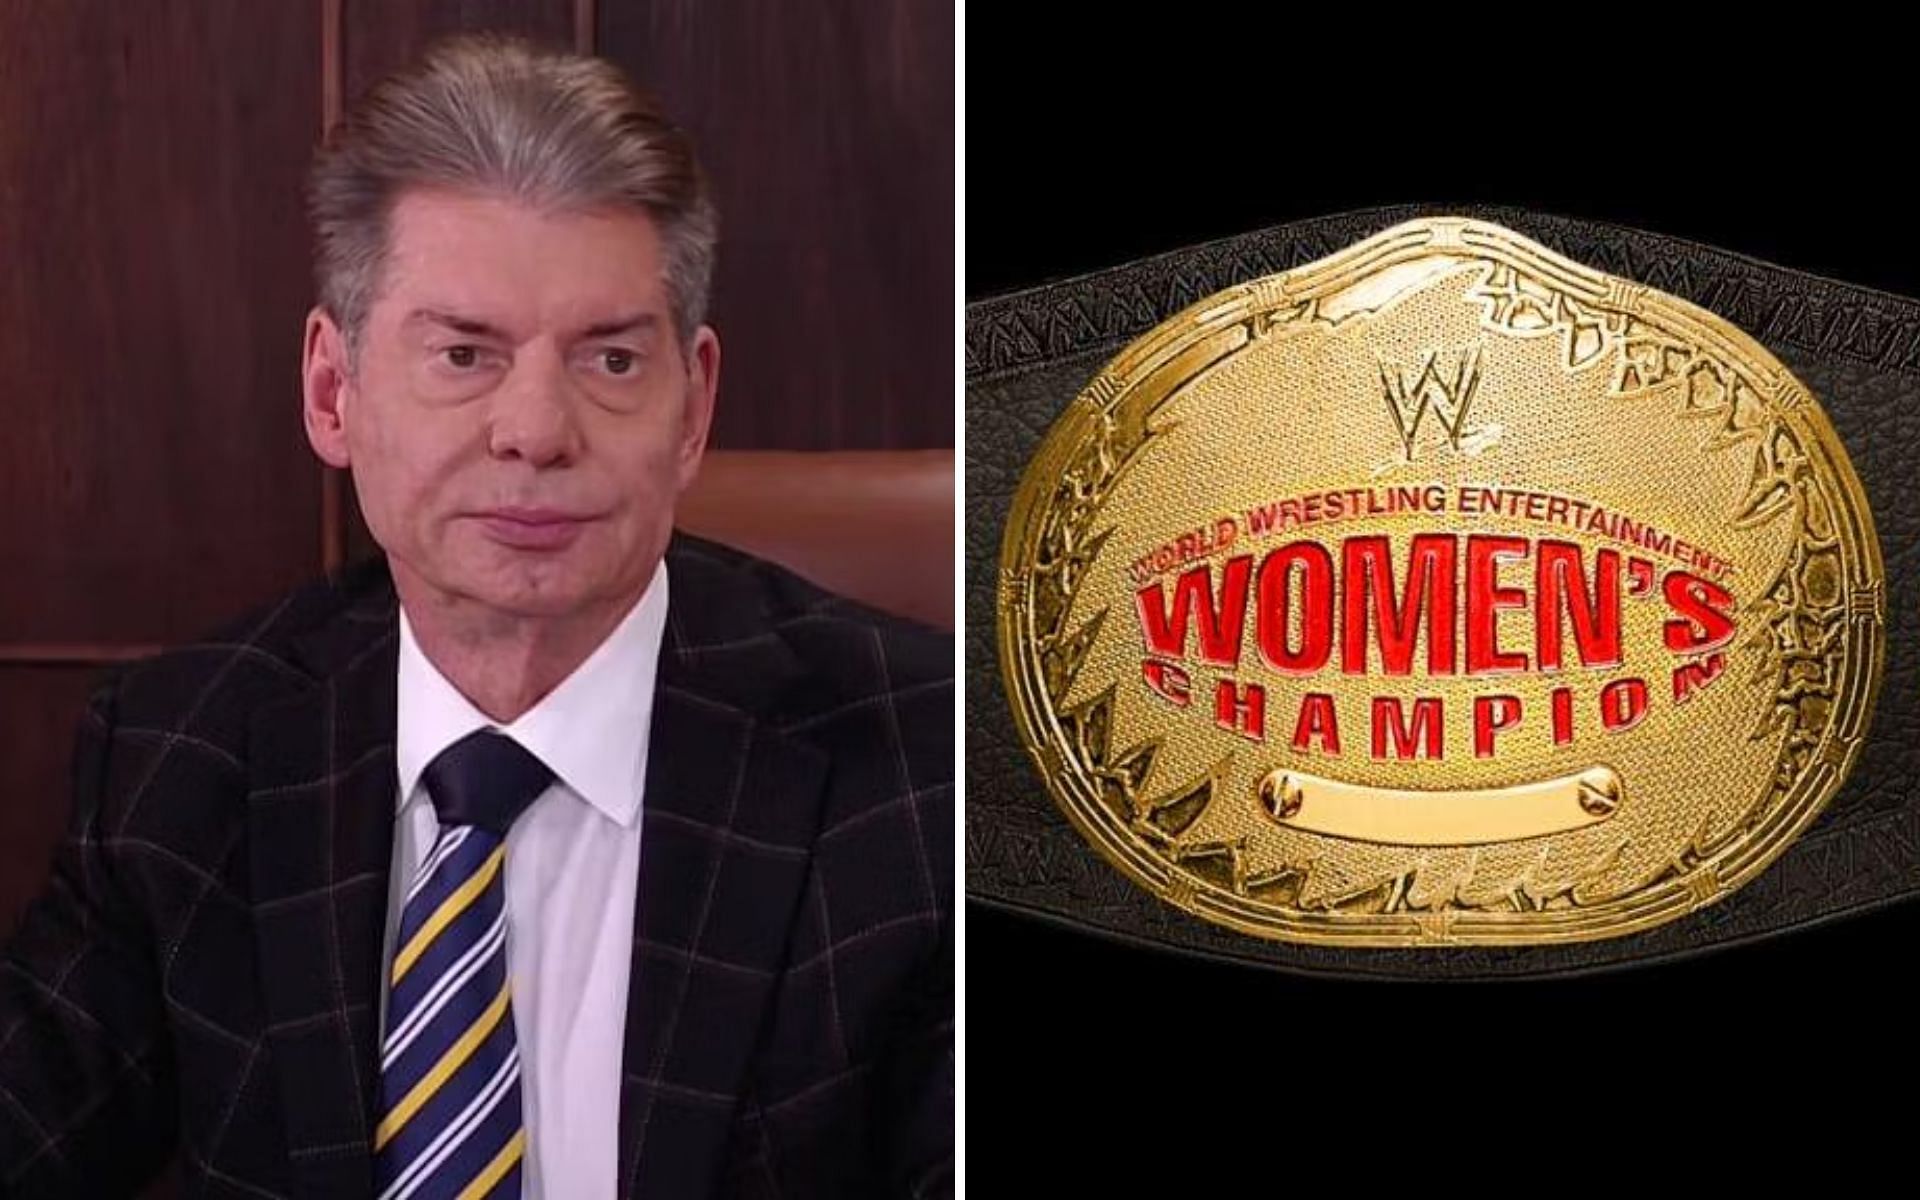 There have been a lot of stories about the former WWE Chairman and CEO